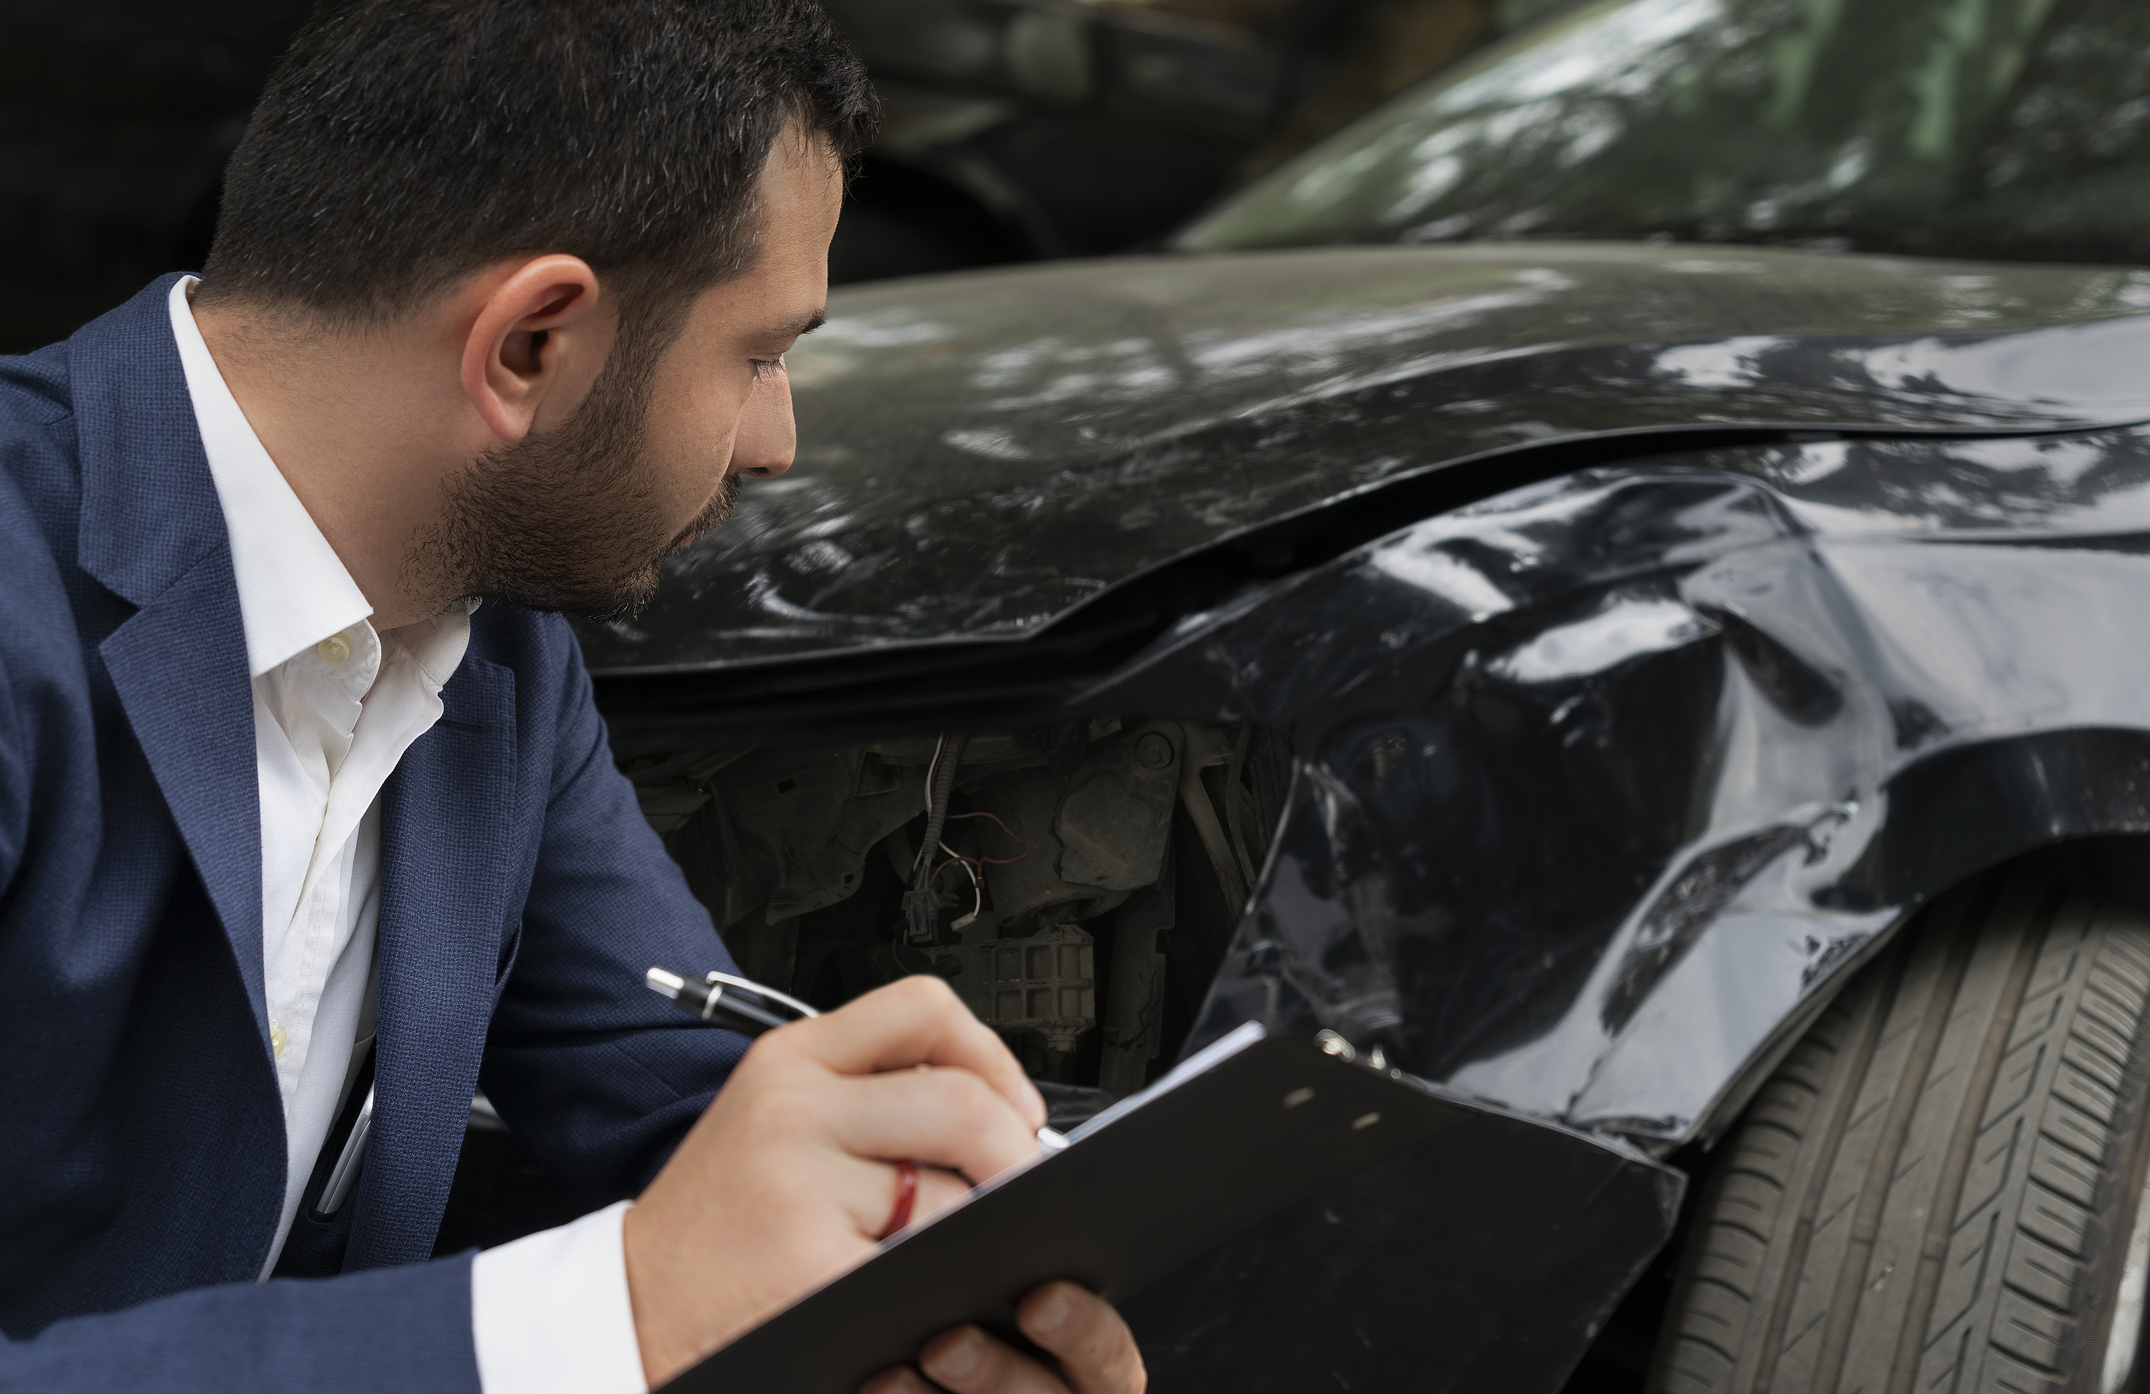 What Types of Evidence Are Necessary For a Car Accident Lawsuit?